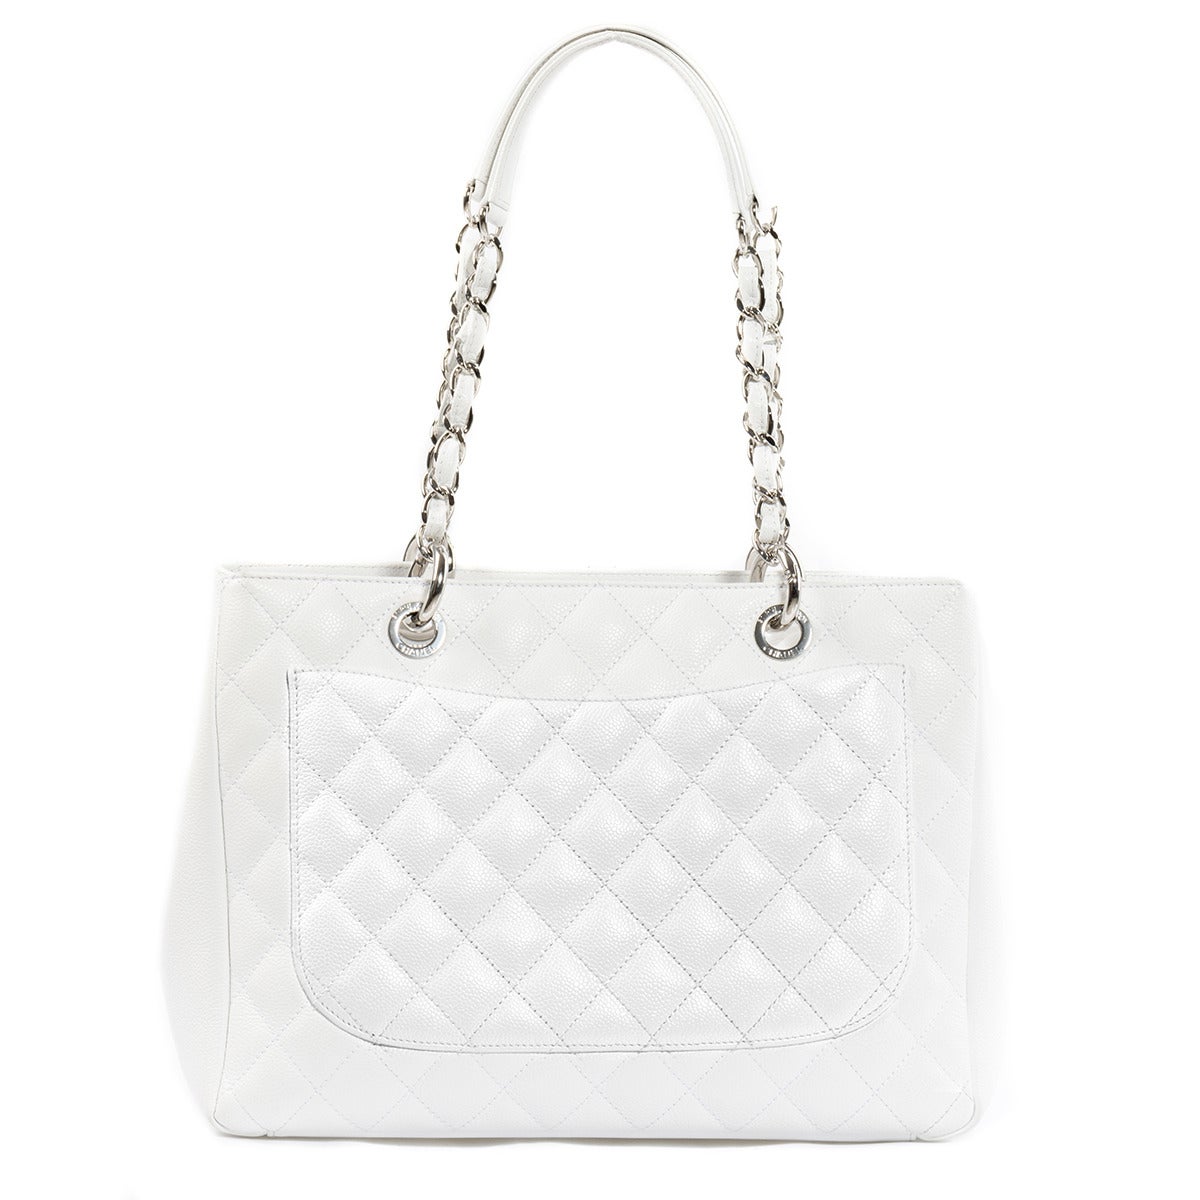 Fantastic, elegant and trendy Chanel GST
Grand shopping tote bag
White color
Matelassé leather
2 Handles
Steel chain
External pocket
2 Internal compartments divided by a large zip pocket
Other 2 internal pockets
Internal grey textile and